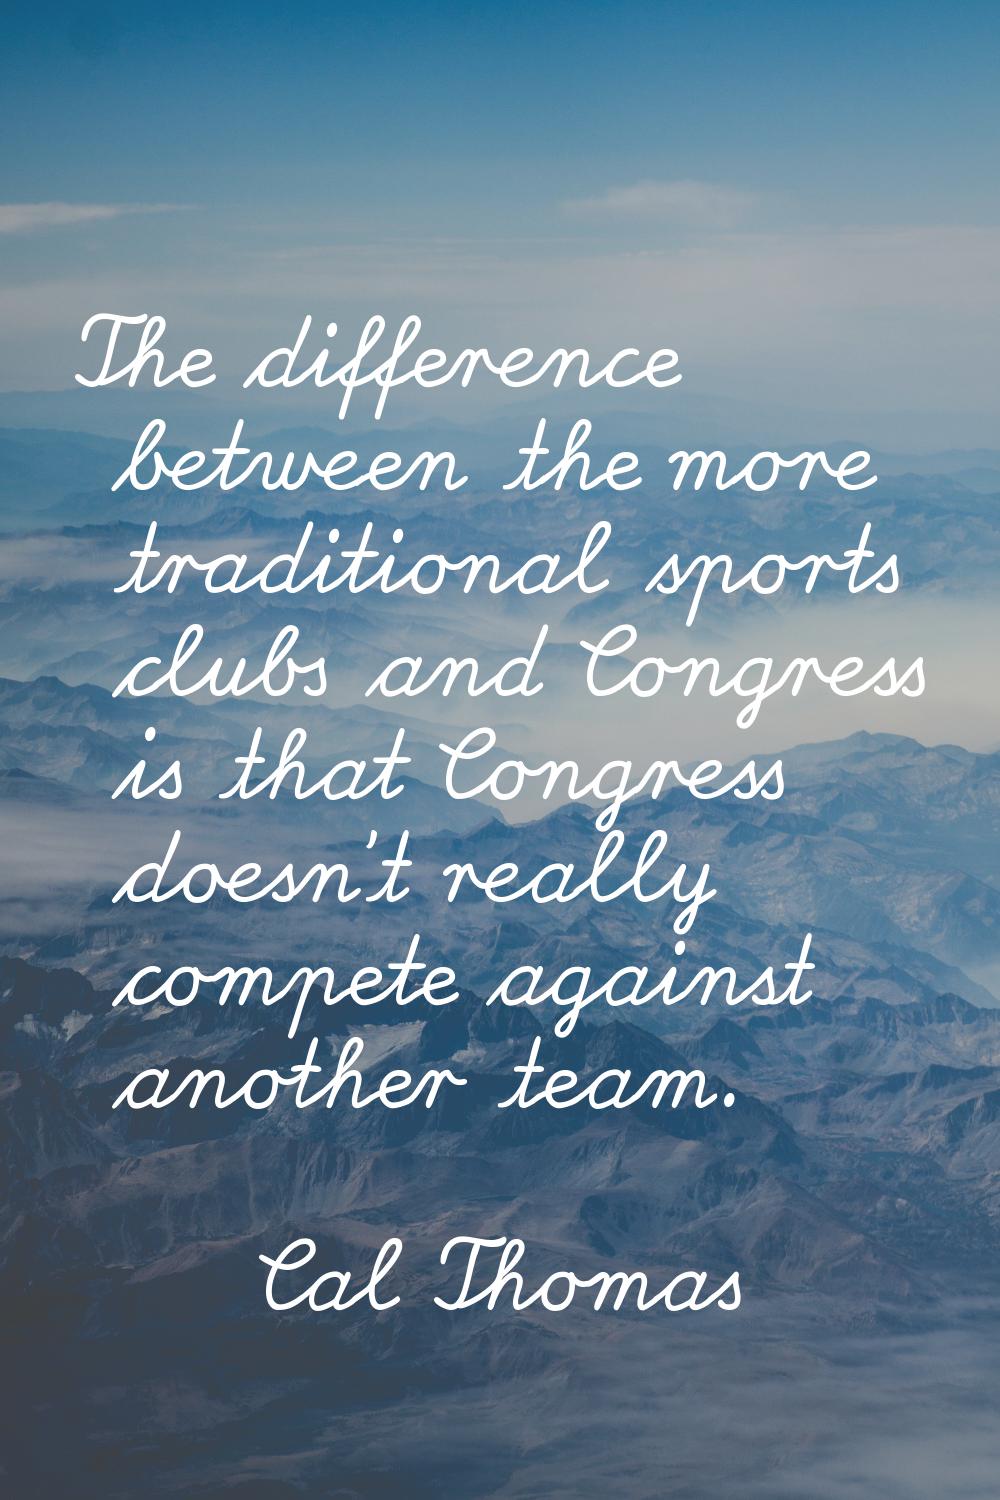 The difference between the more traditional sports clubs and Congress is that Congress doesn't real